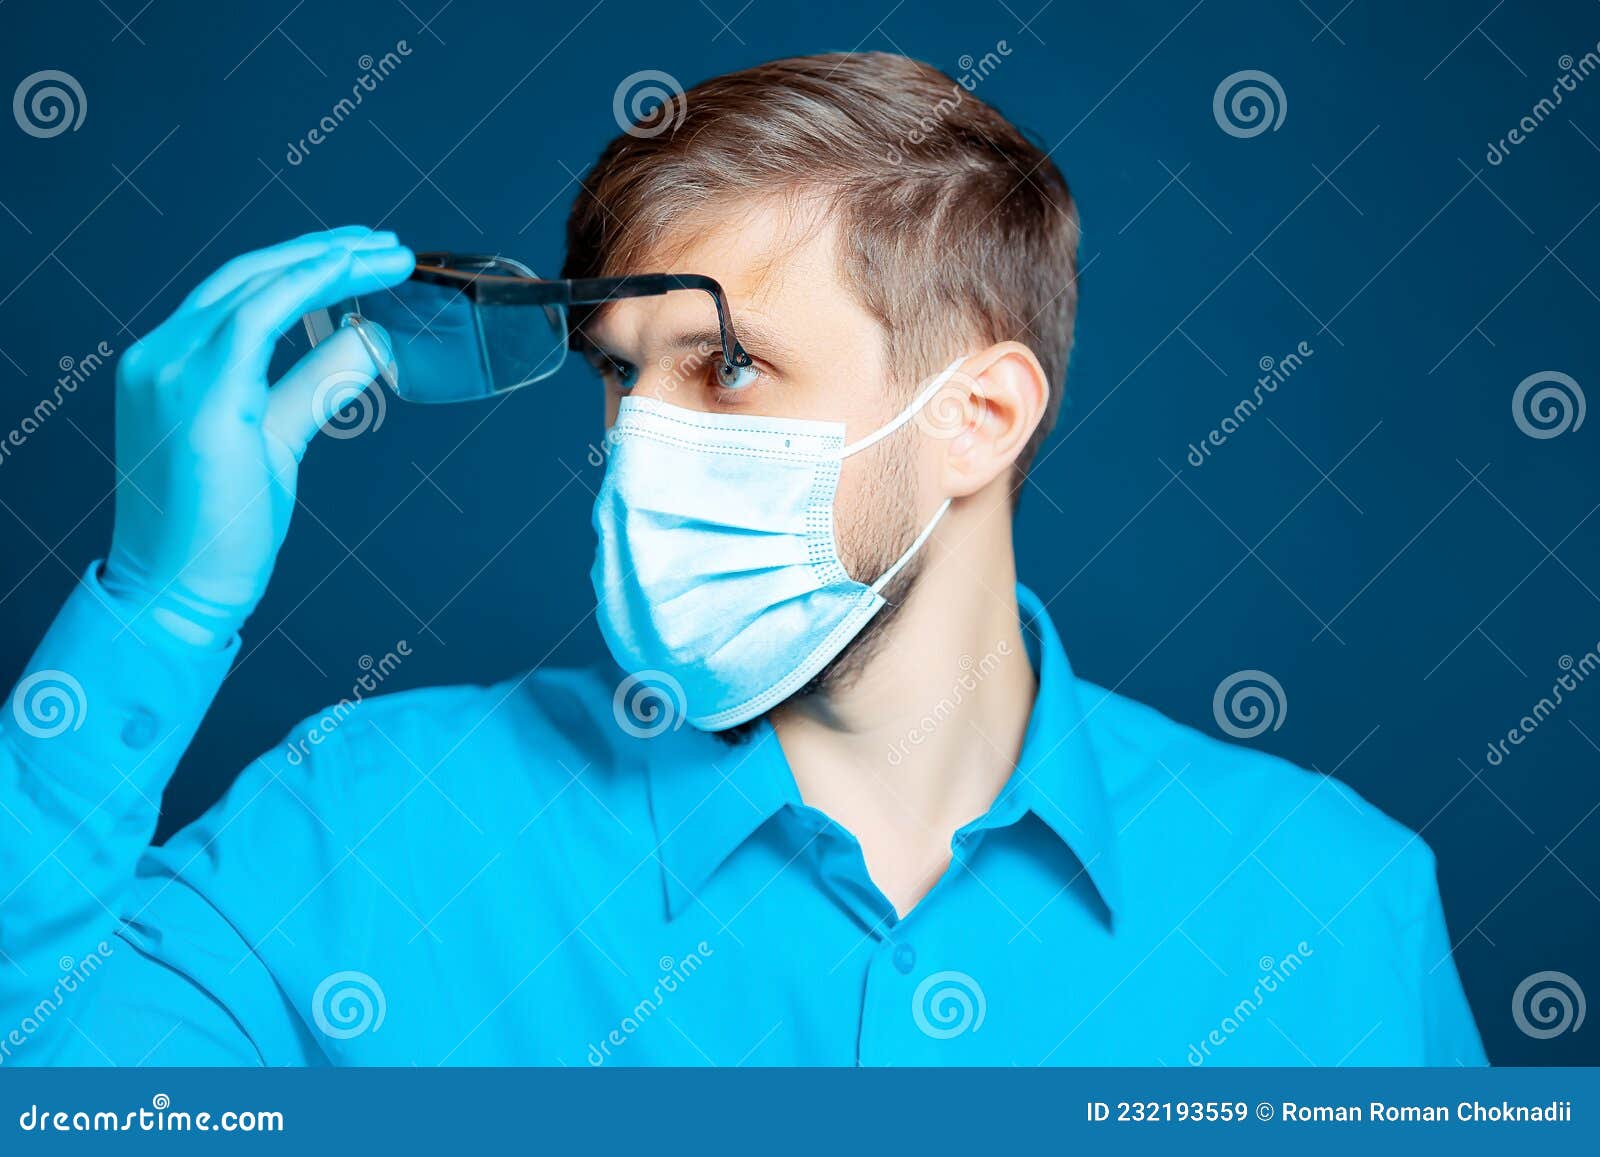 Doctor Wearing a Protective Mask and Gloves Puts on Glasses Stock Image ...